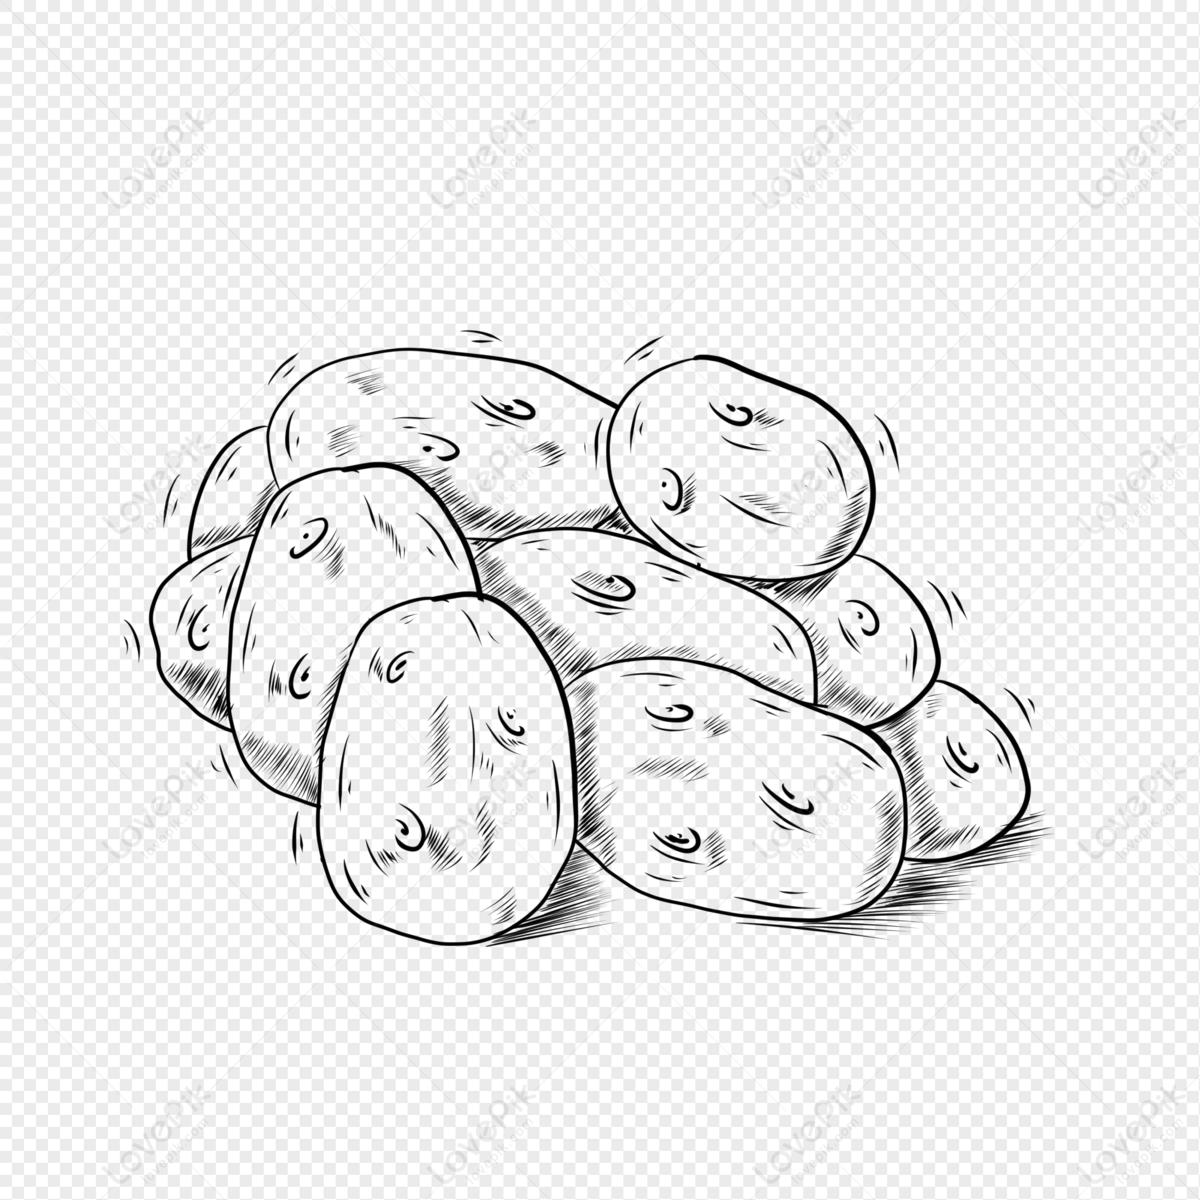 Food Vegetable Black And White Lineart Potato Png Transparent Image And  Clipart Image For Free Download - Lovepik | 401693527